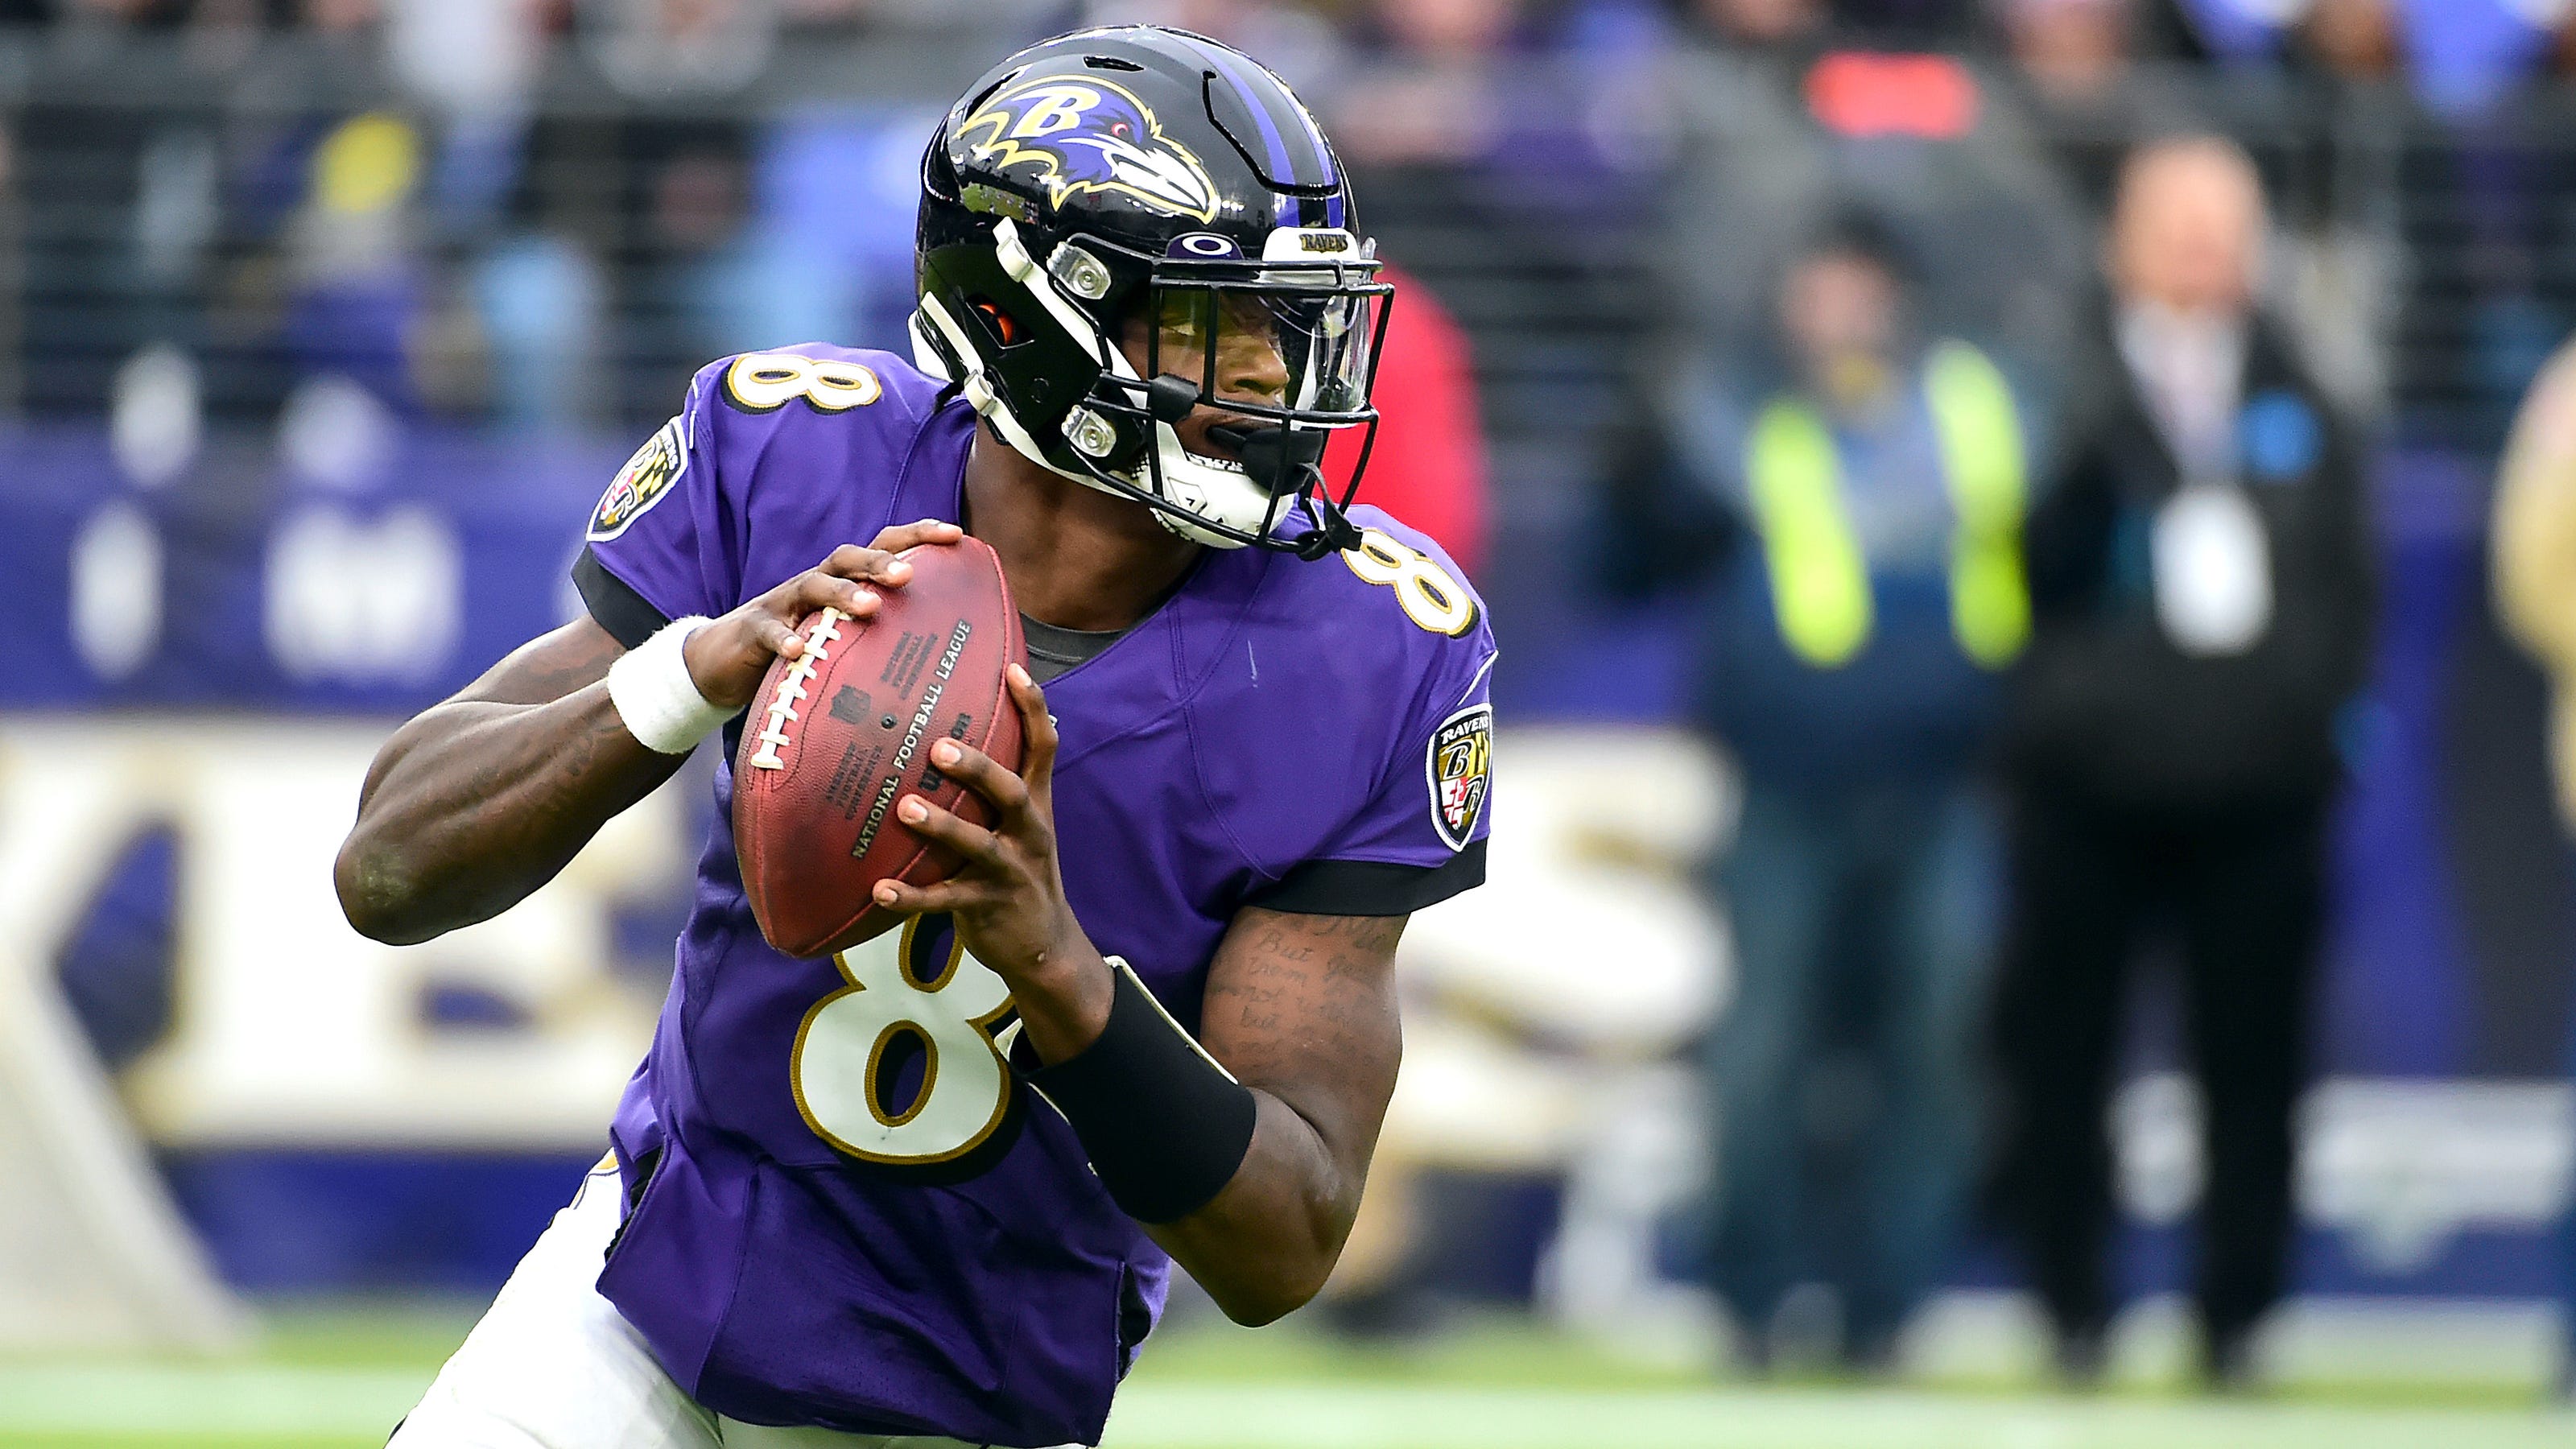 Lamar Jackson's highlights have become NFL's must-see TV